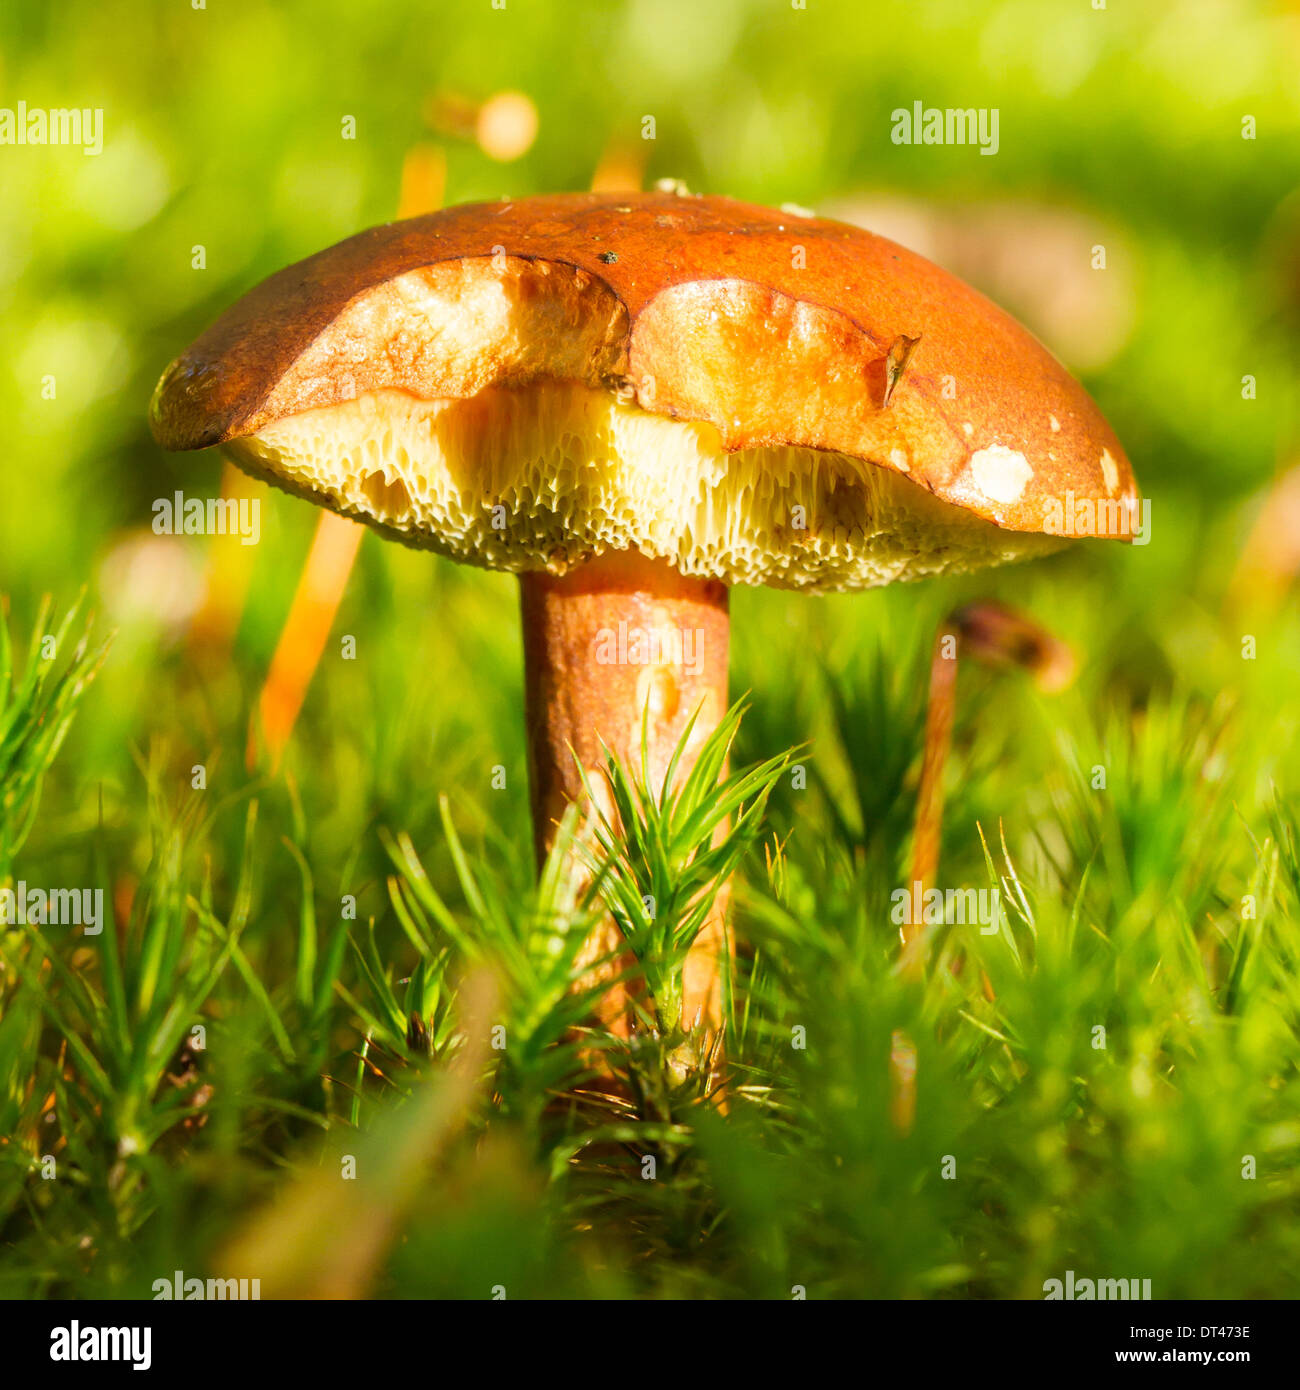 Close-up of a forest mushroom in the grass Stock Photo